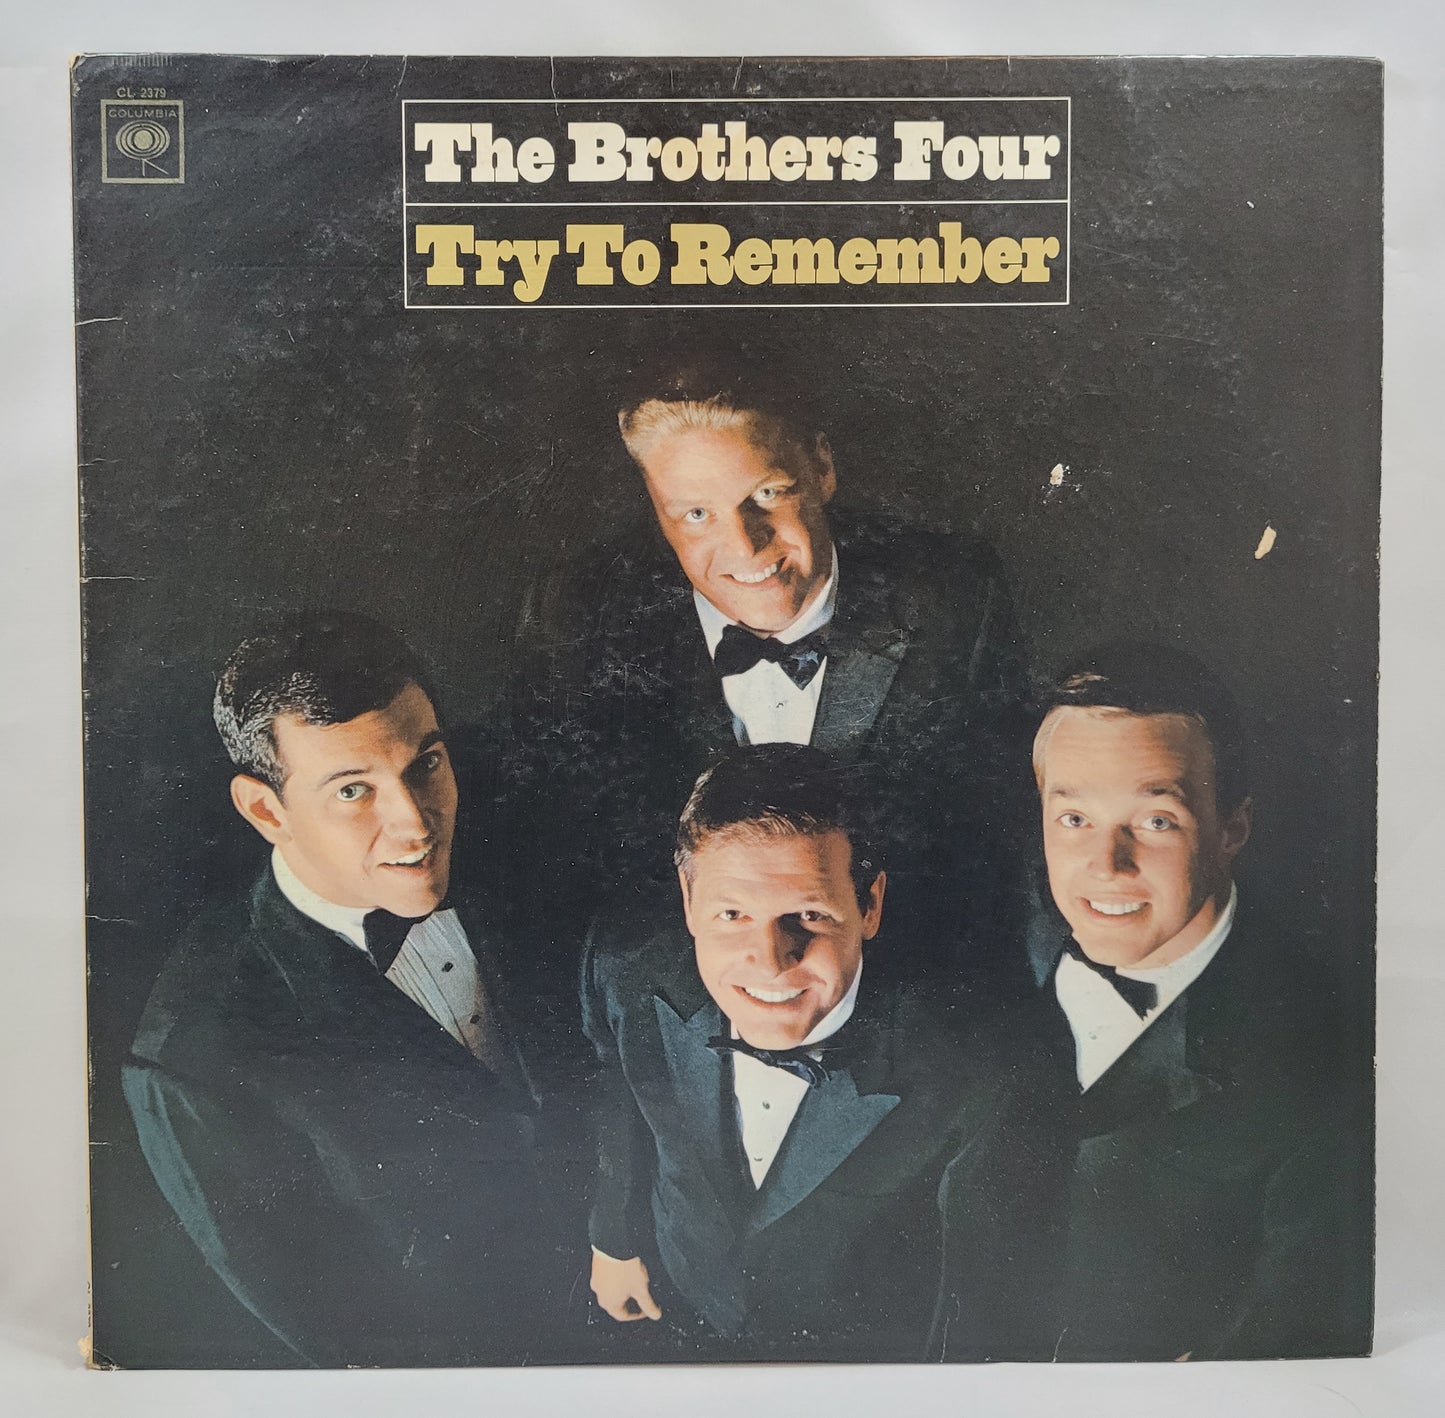 The Brothers Four - Try to Remember [1965 Mono] [Used Vinyl Record LP]